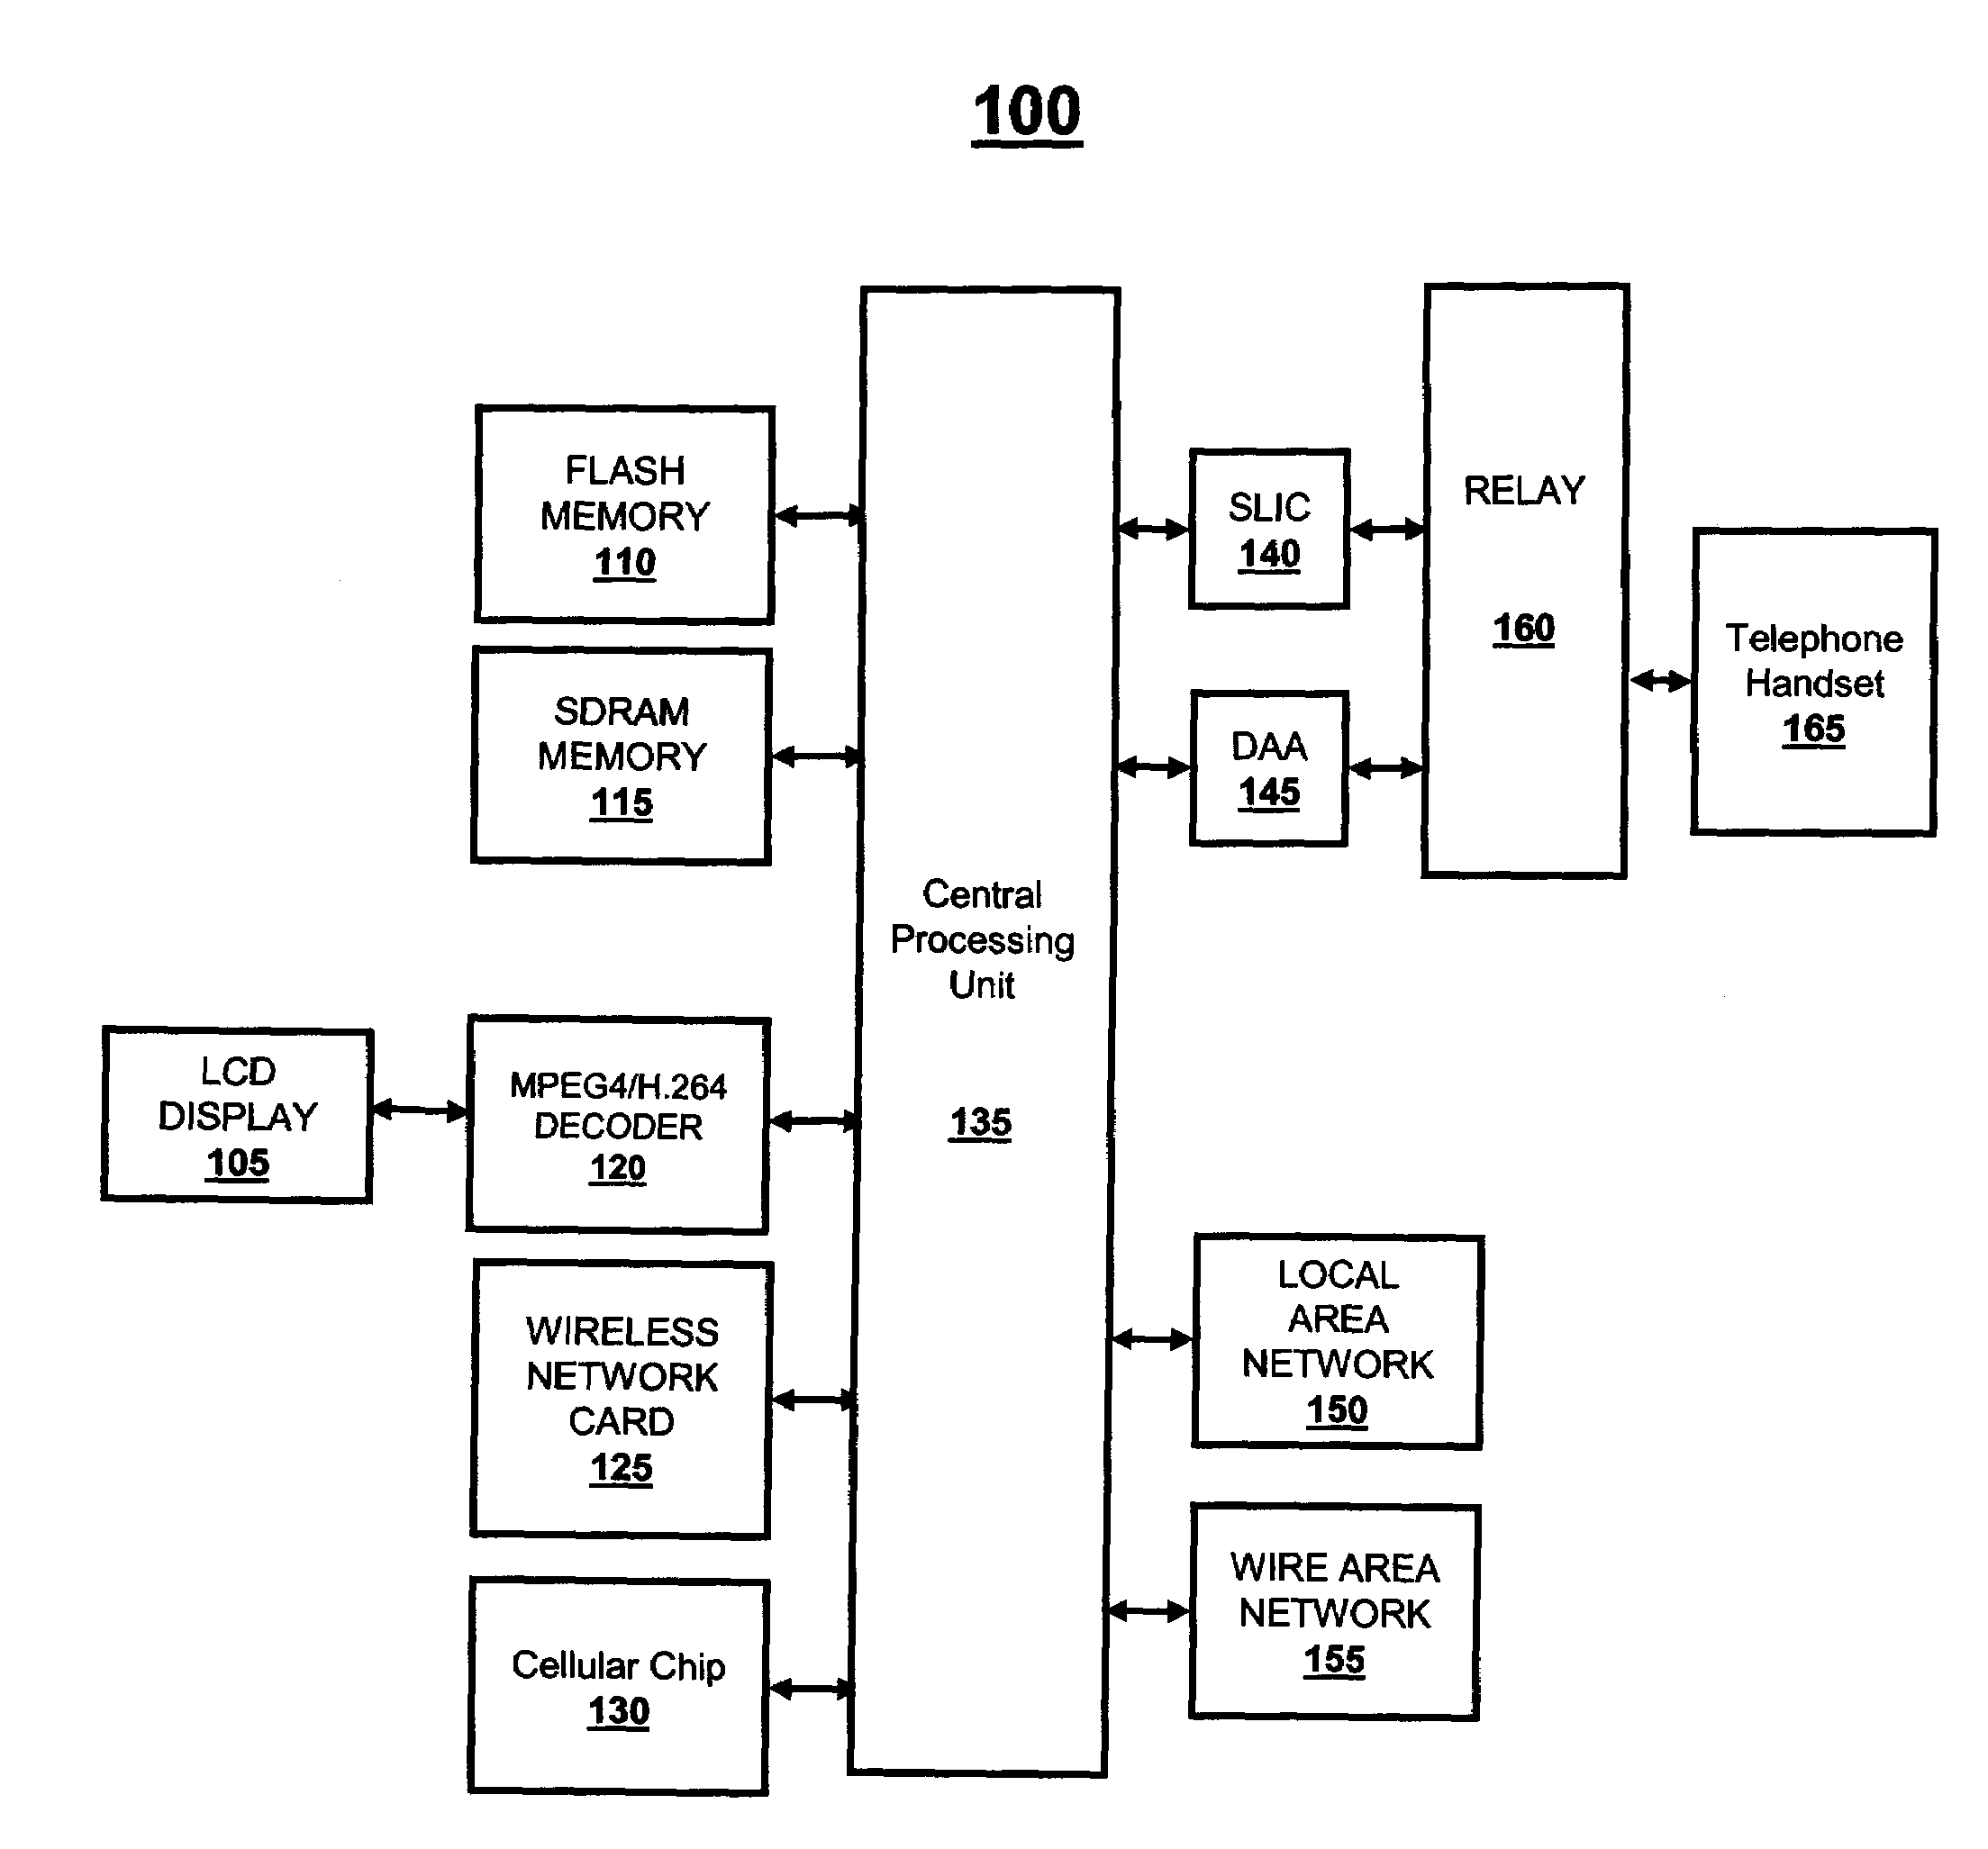 Computer-Related Devices and Techniques for Facilitating an Emergency Call Via a Cellular or Data Network